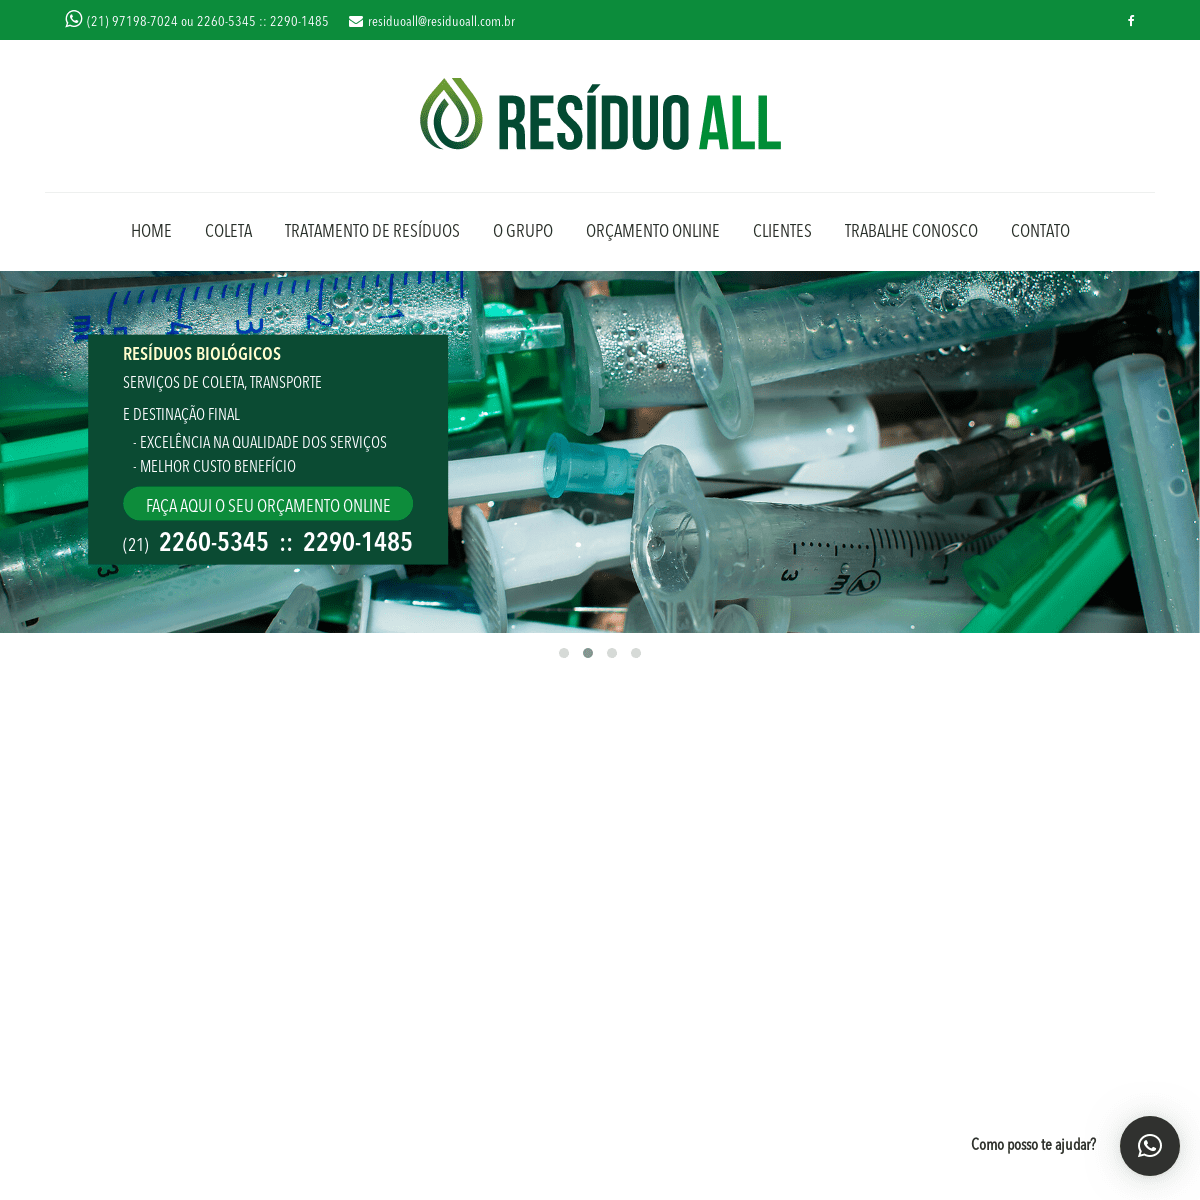 A complete backup of residuoall.com.br